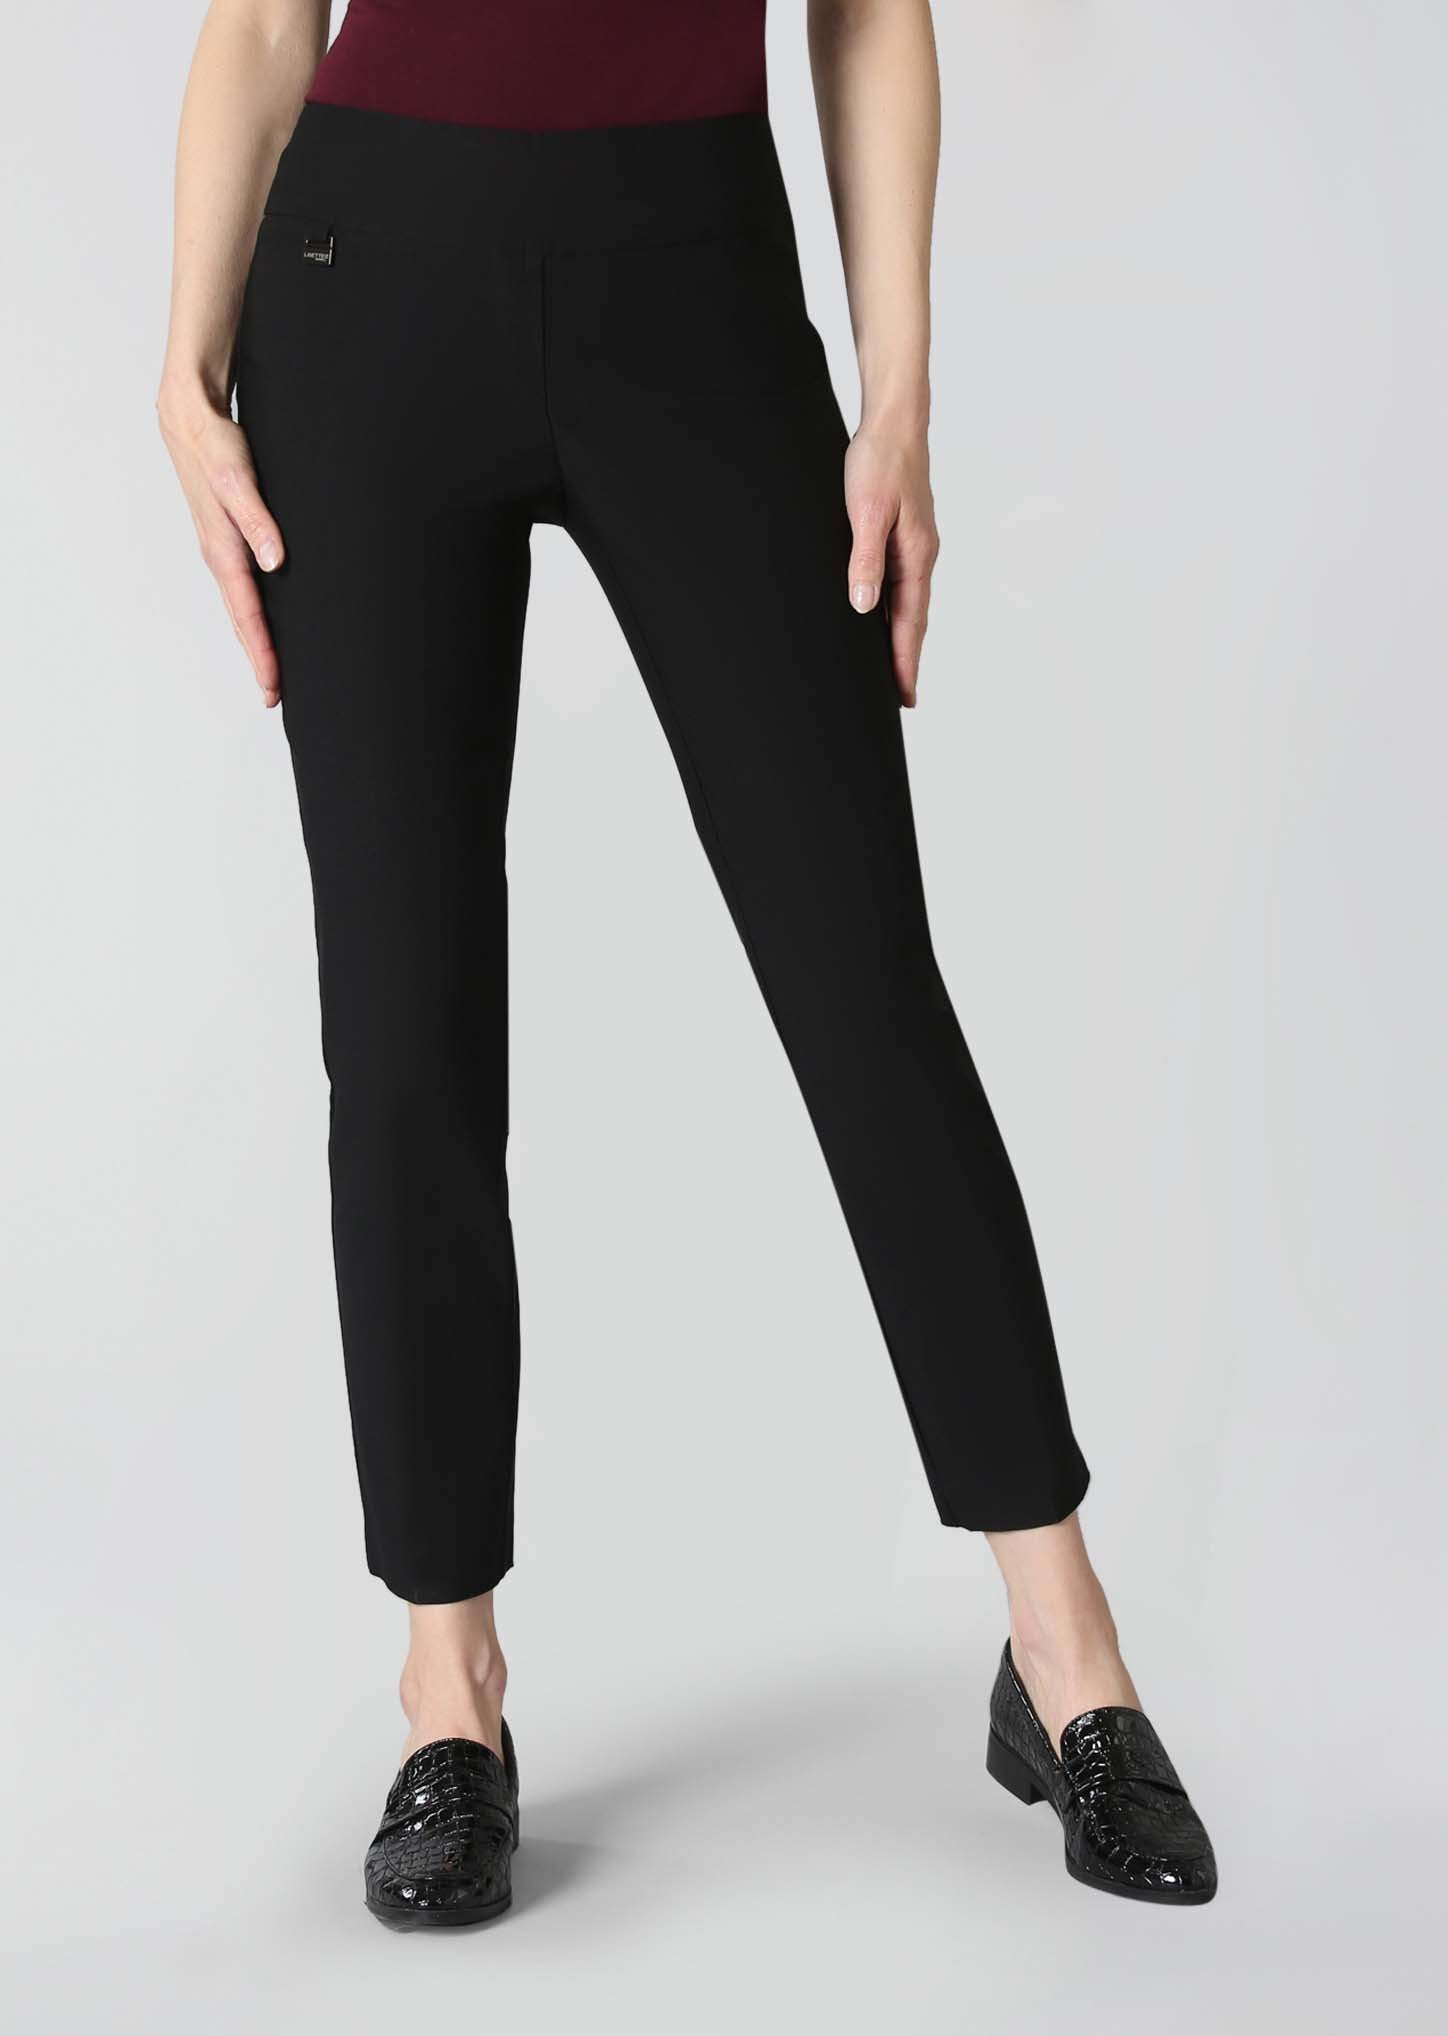 Ladies Cotton Ankle Pant, Size : XL, XXL, XXXL, Feature : Anti-Wrinkle,  Comfortable, Dry Cleaning at Rs 180 / Piece in Delhi